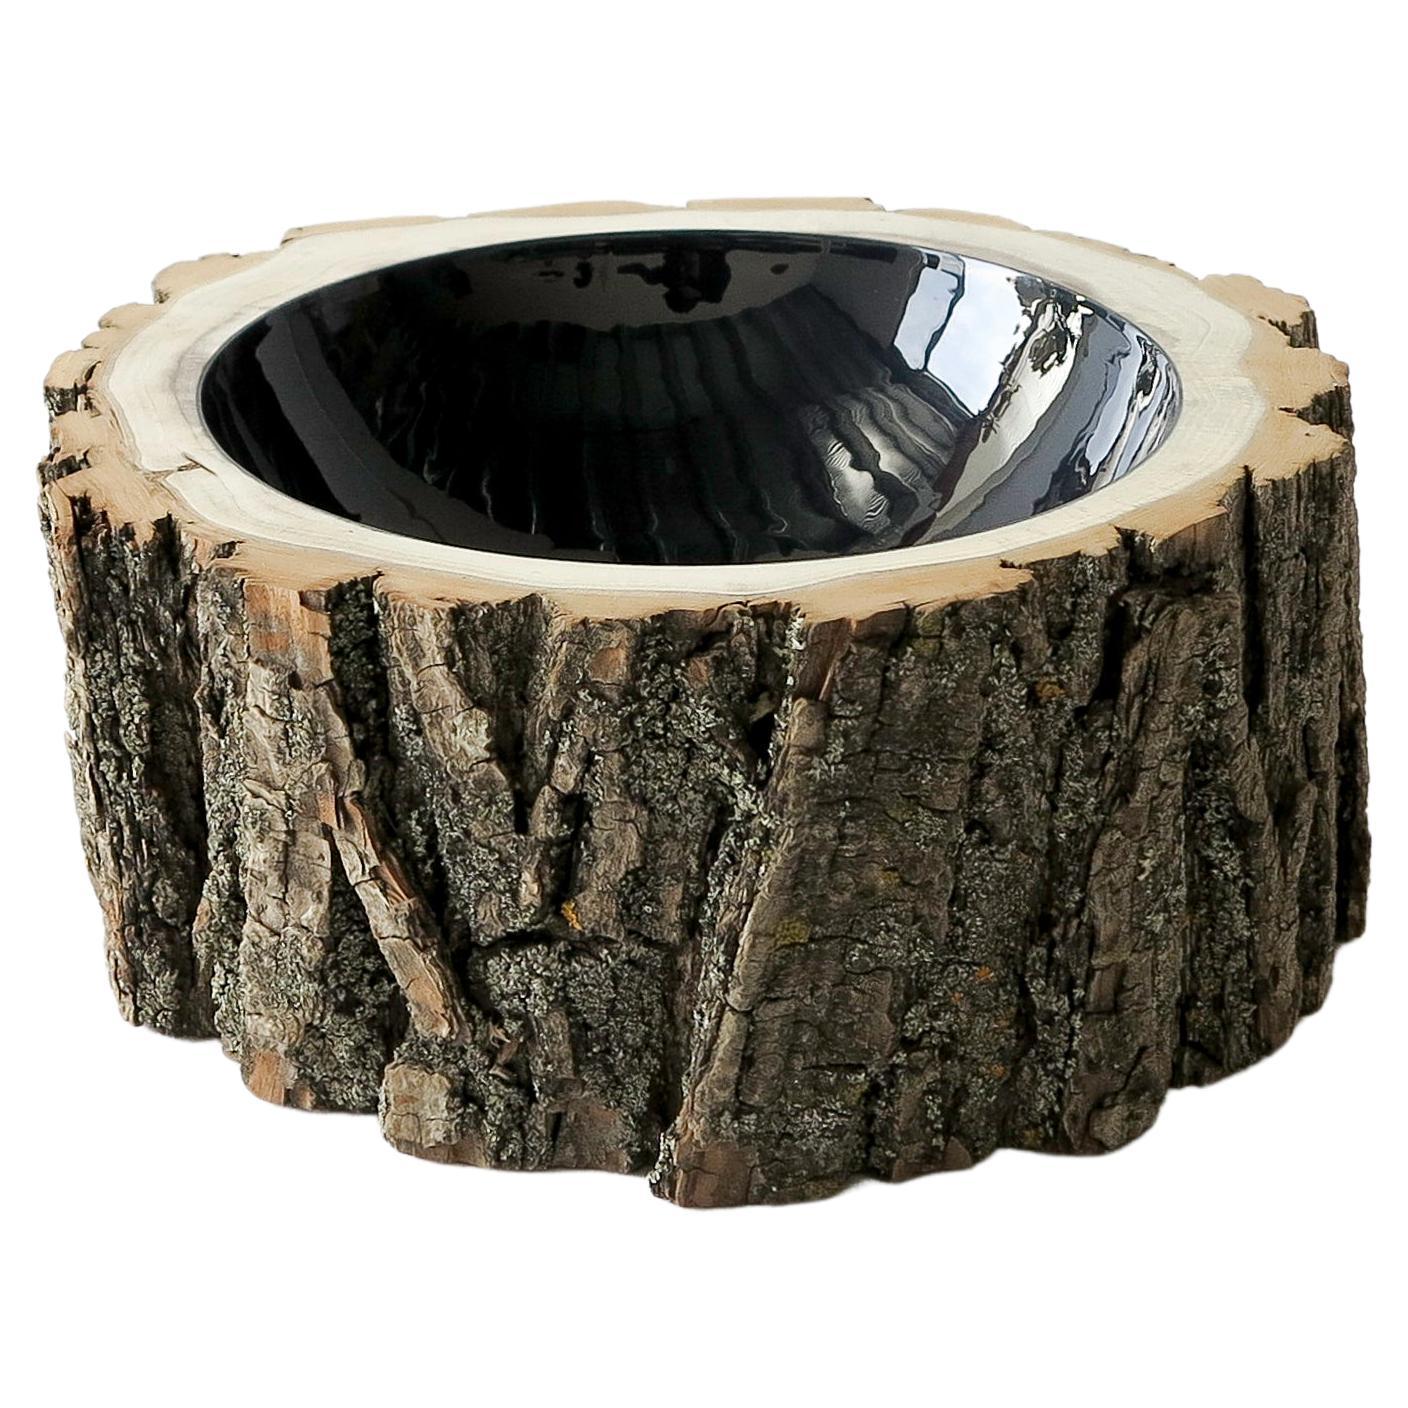 Black Size 9 Log Bowl by Loyal Loot Made To Order Hand Made from Reclaimed Wood